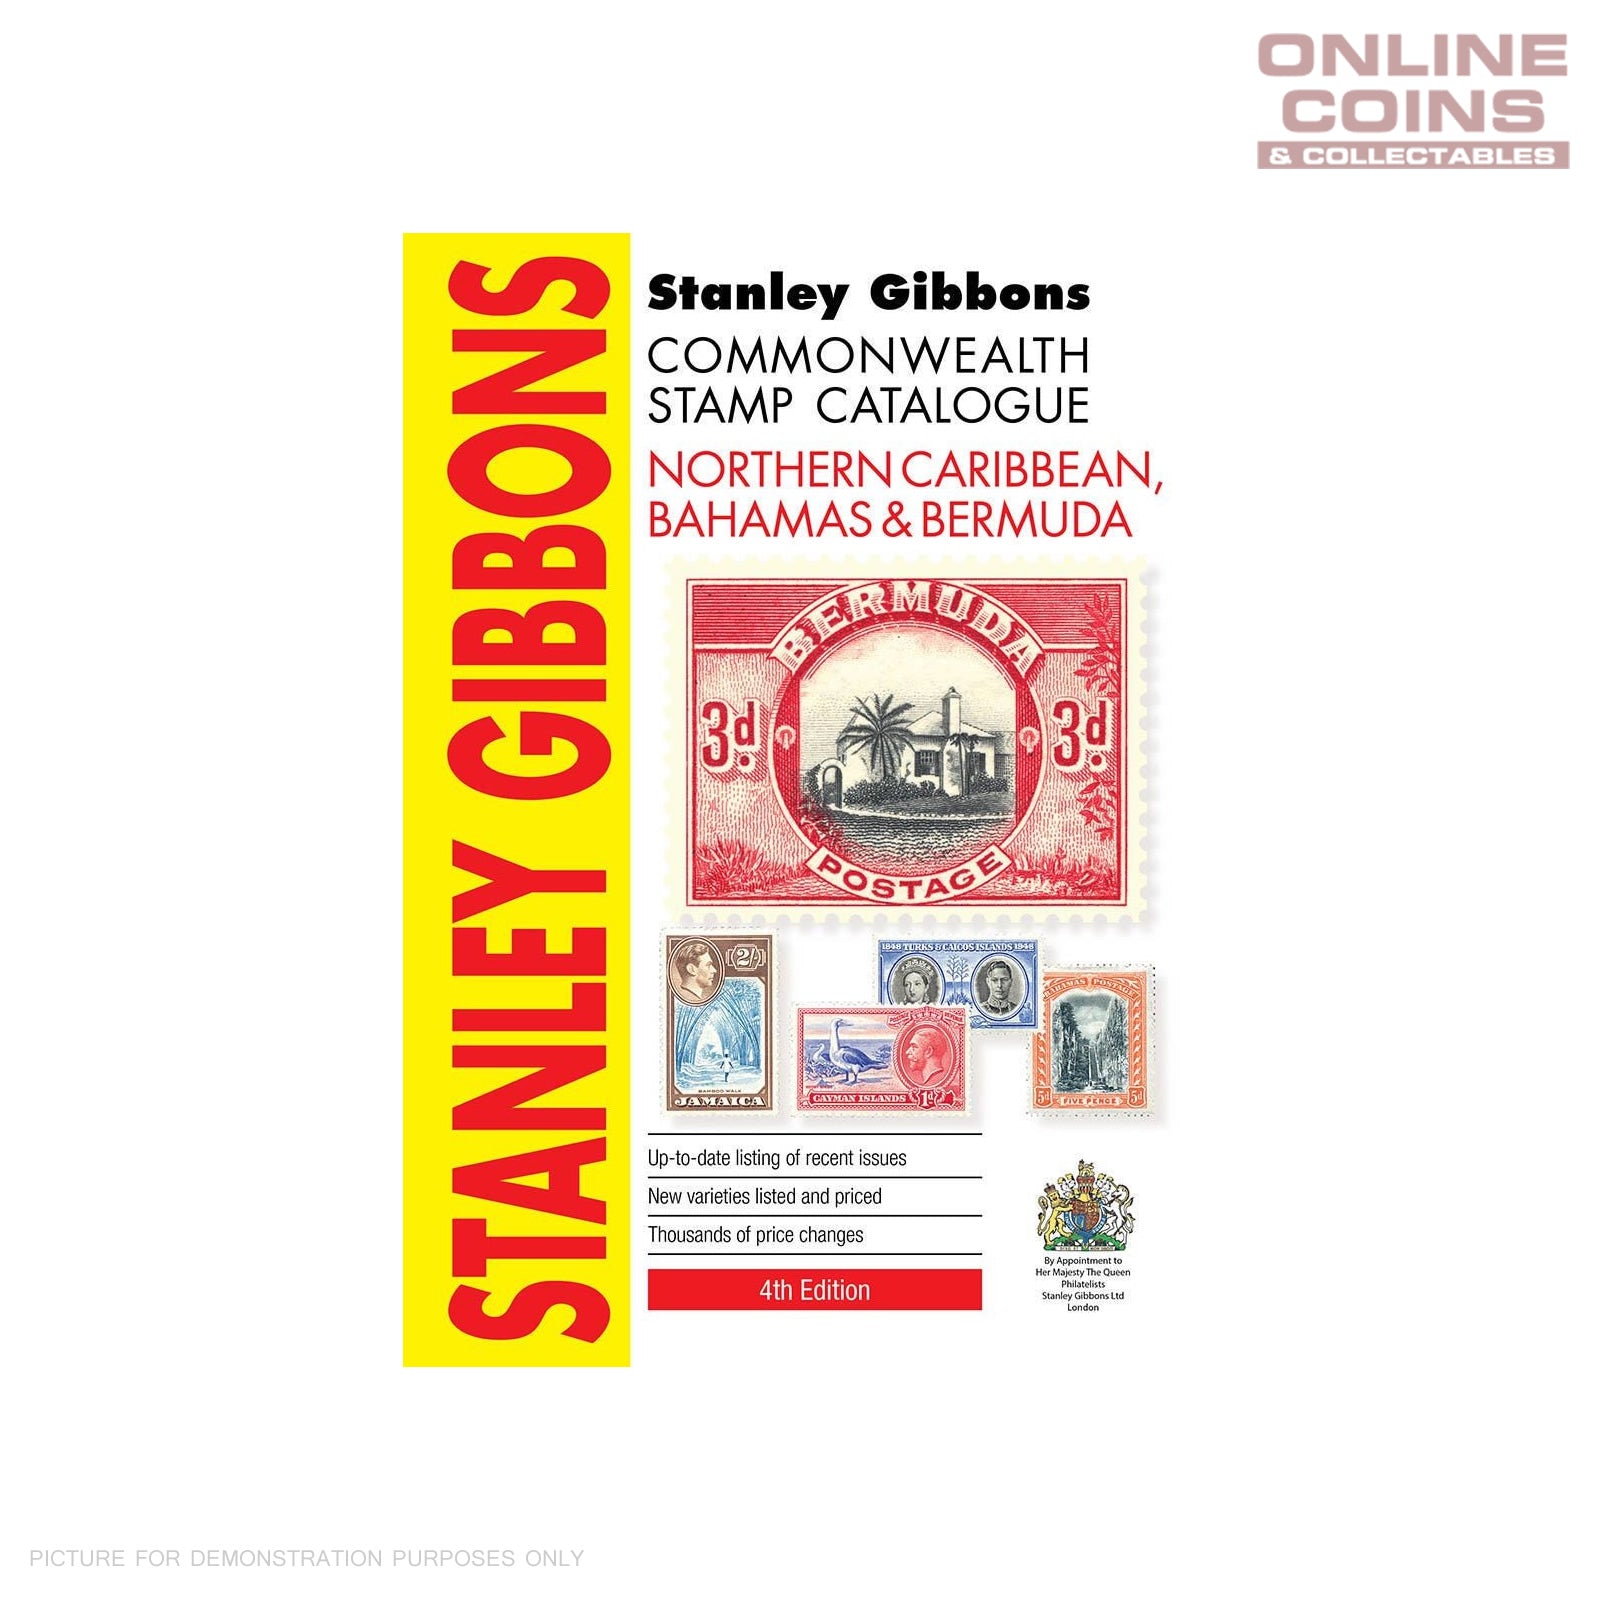 2016 Stanley Gibbons Northern Caribbean, Bahamas and Bermuda Stamp Catalogue 4th Edition